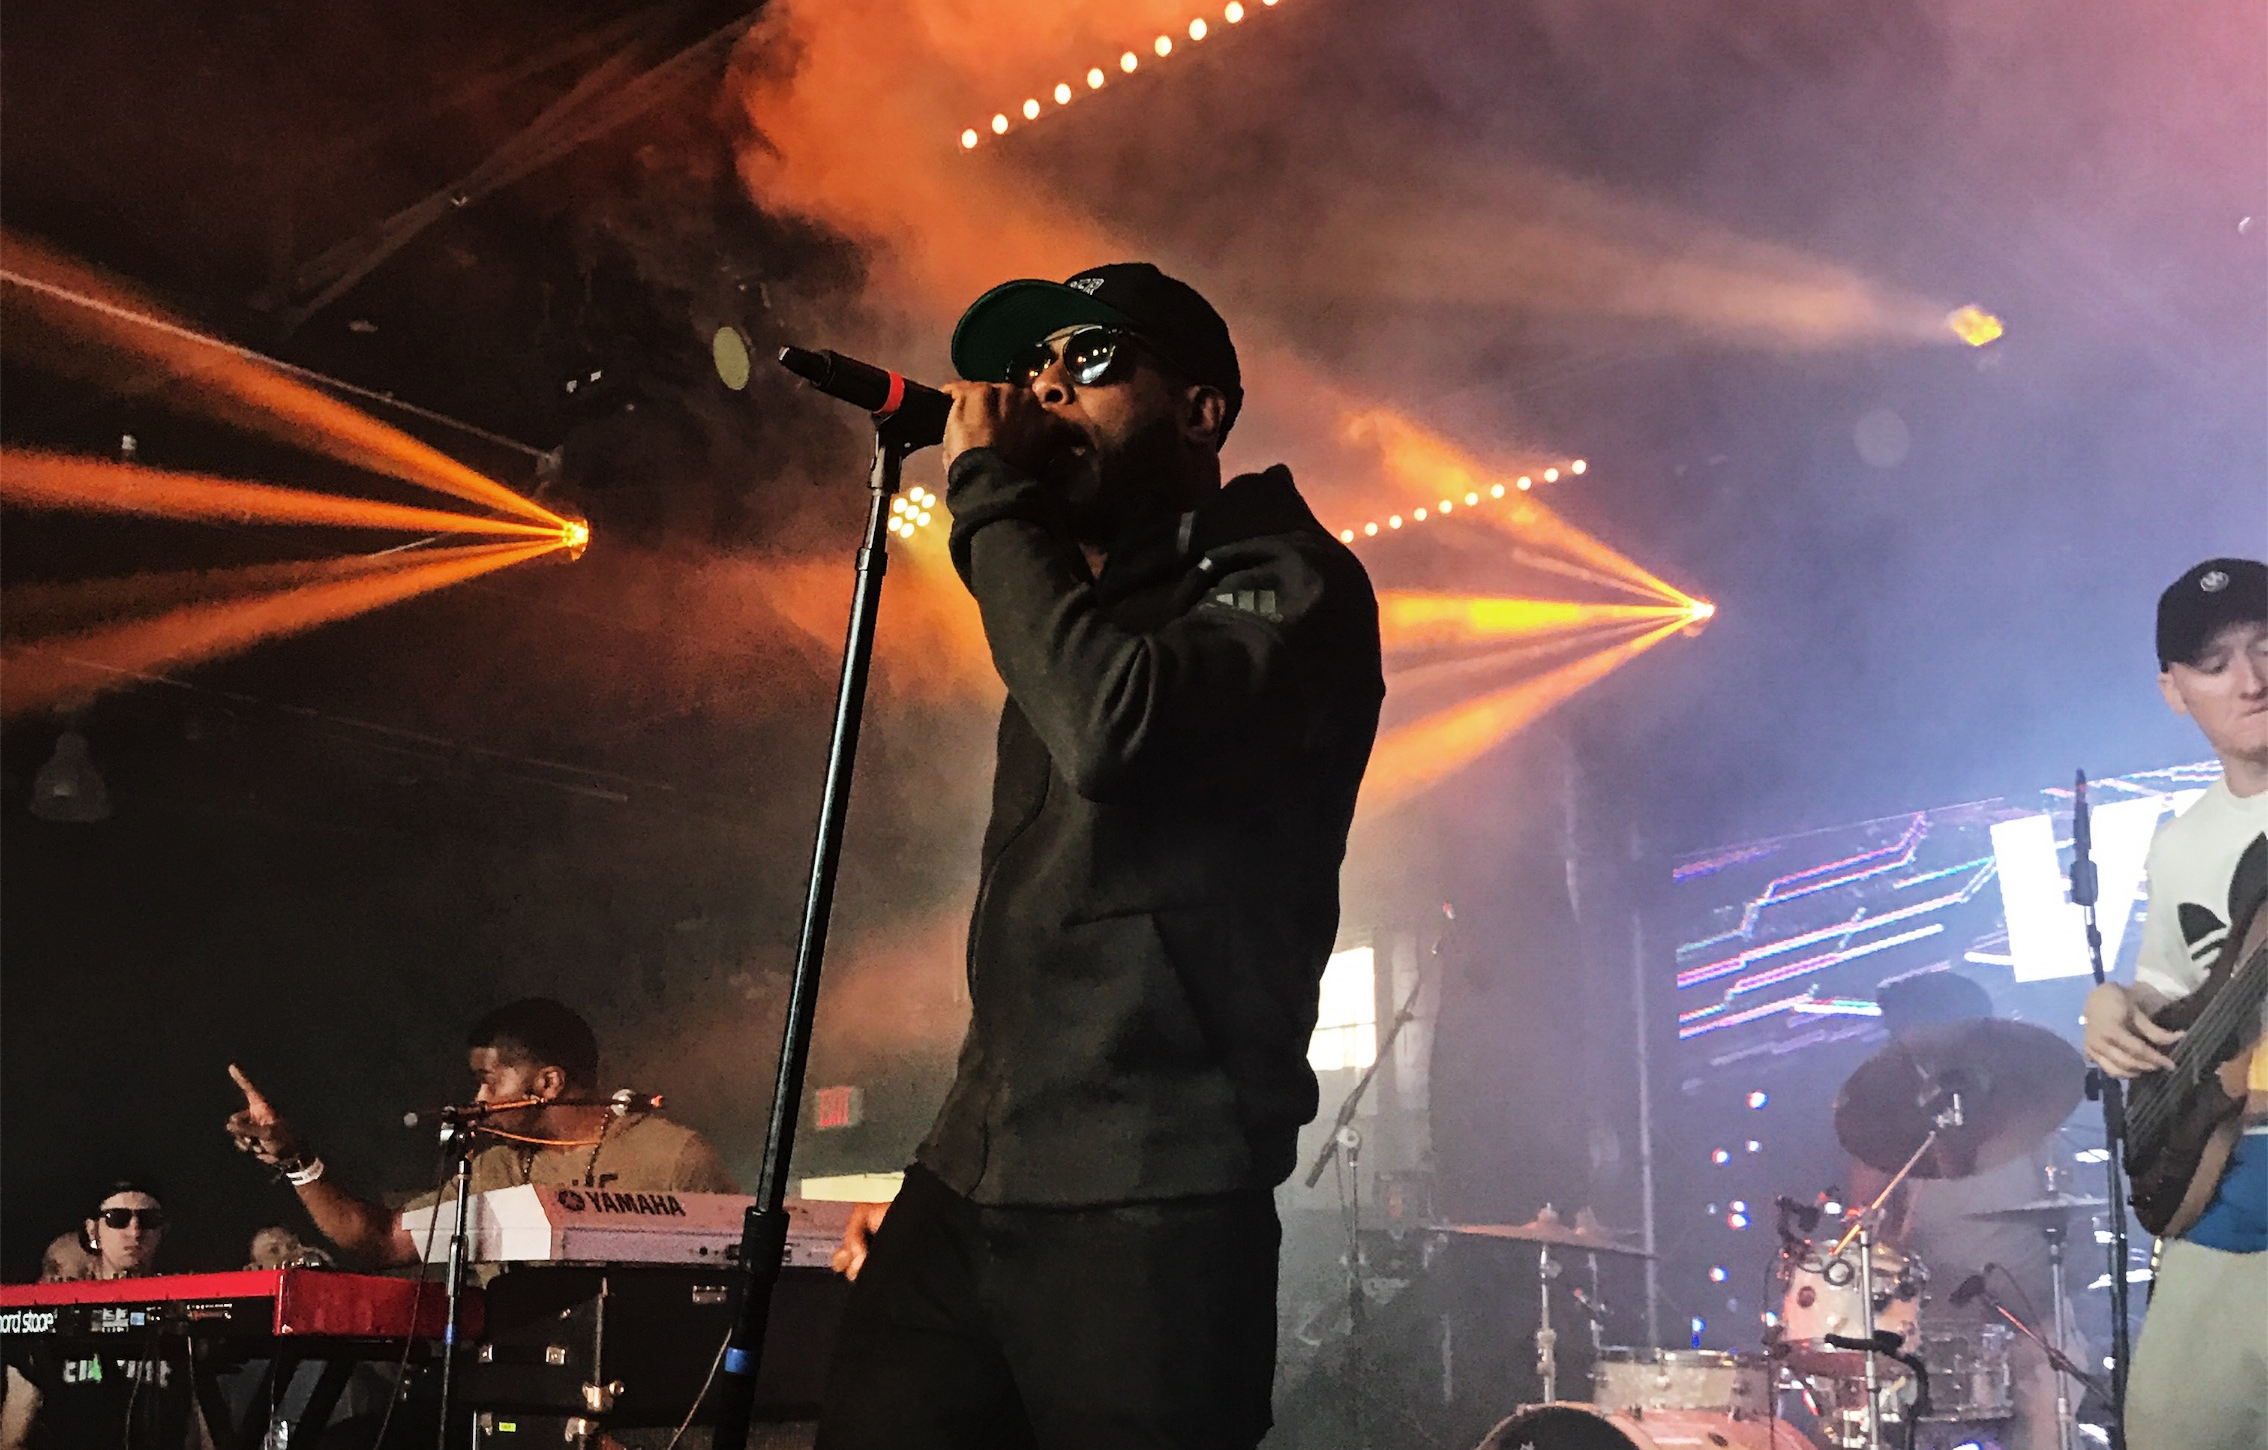 SXSW 2017: The Best Live Music We Saw Thursday, Featuring Frankie Rose, Talib Kweli, More